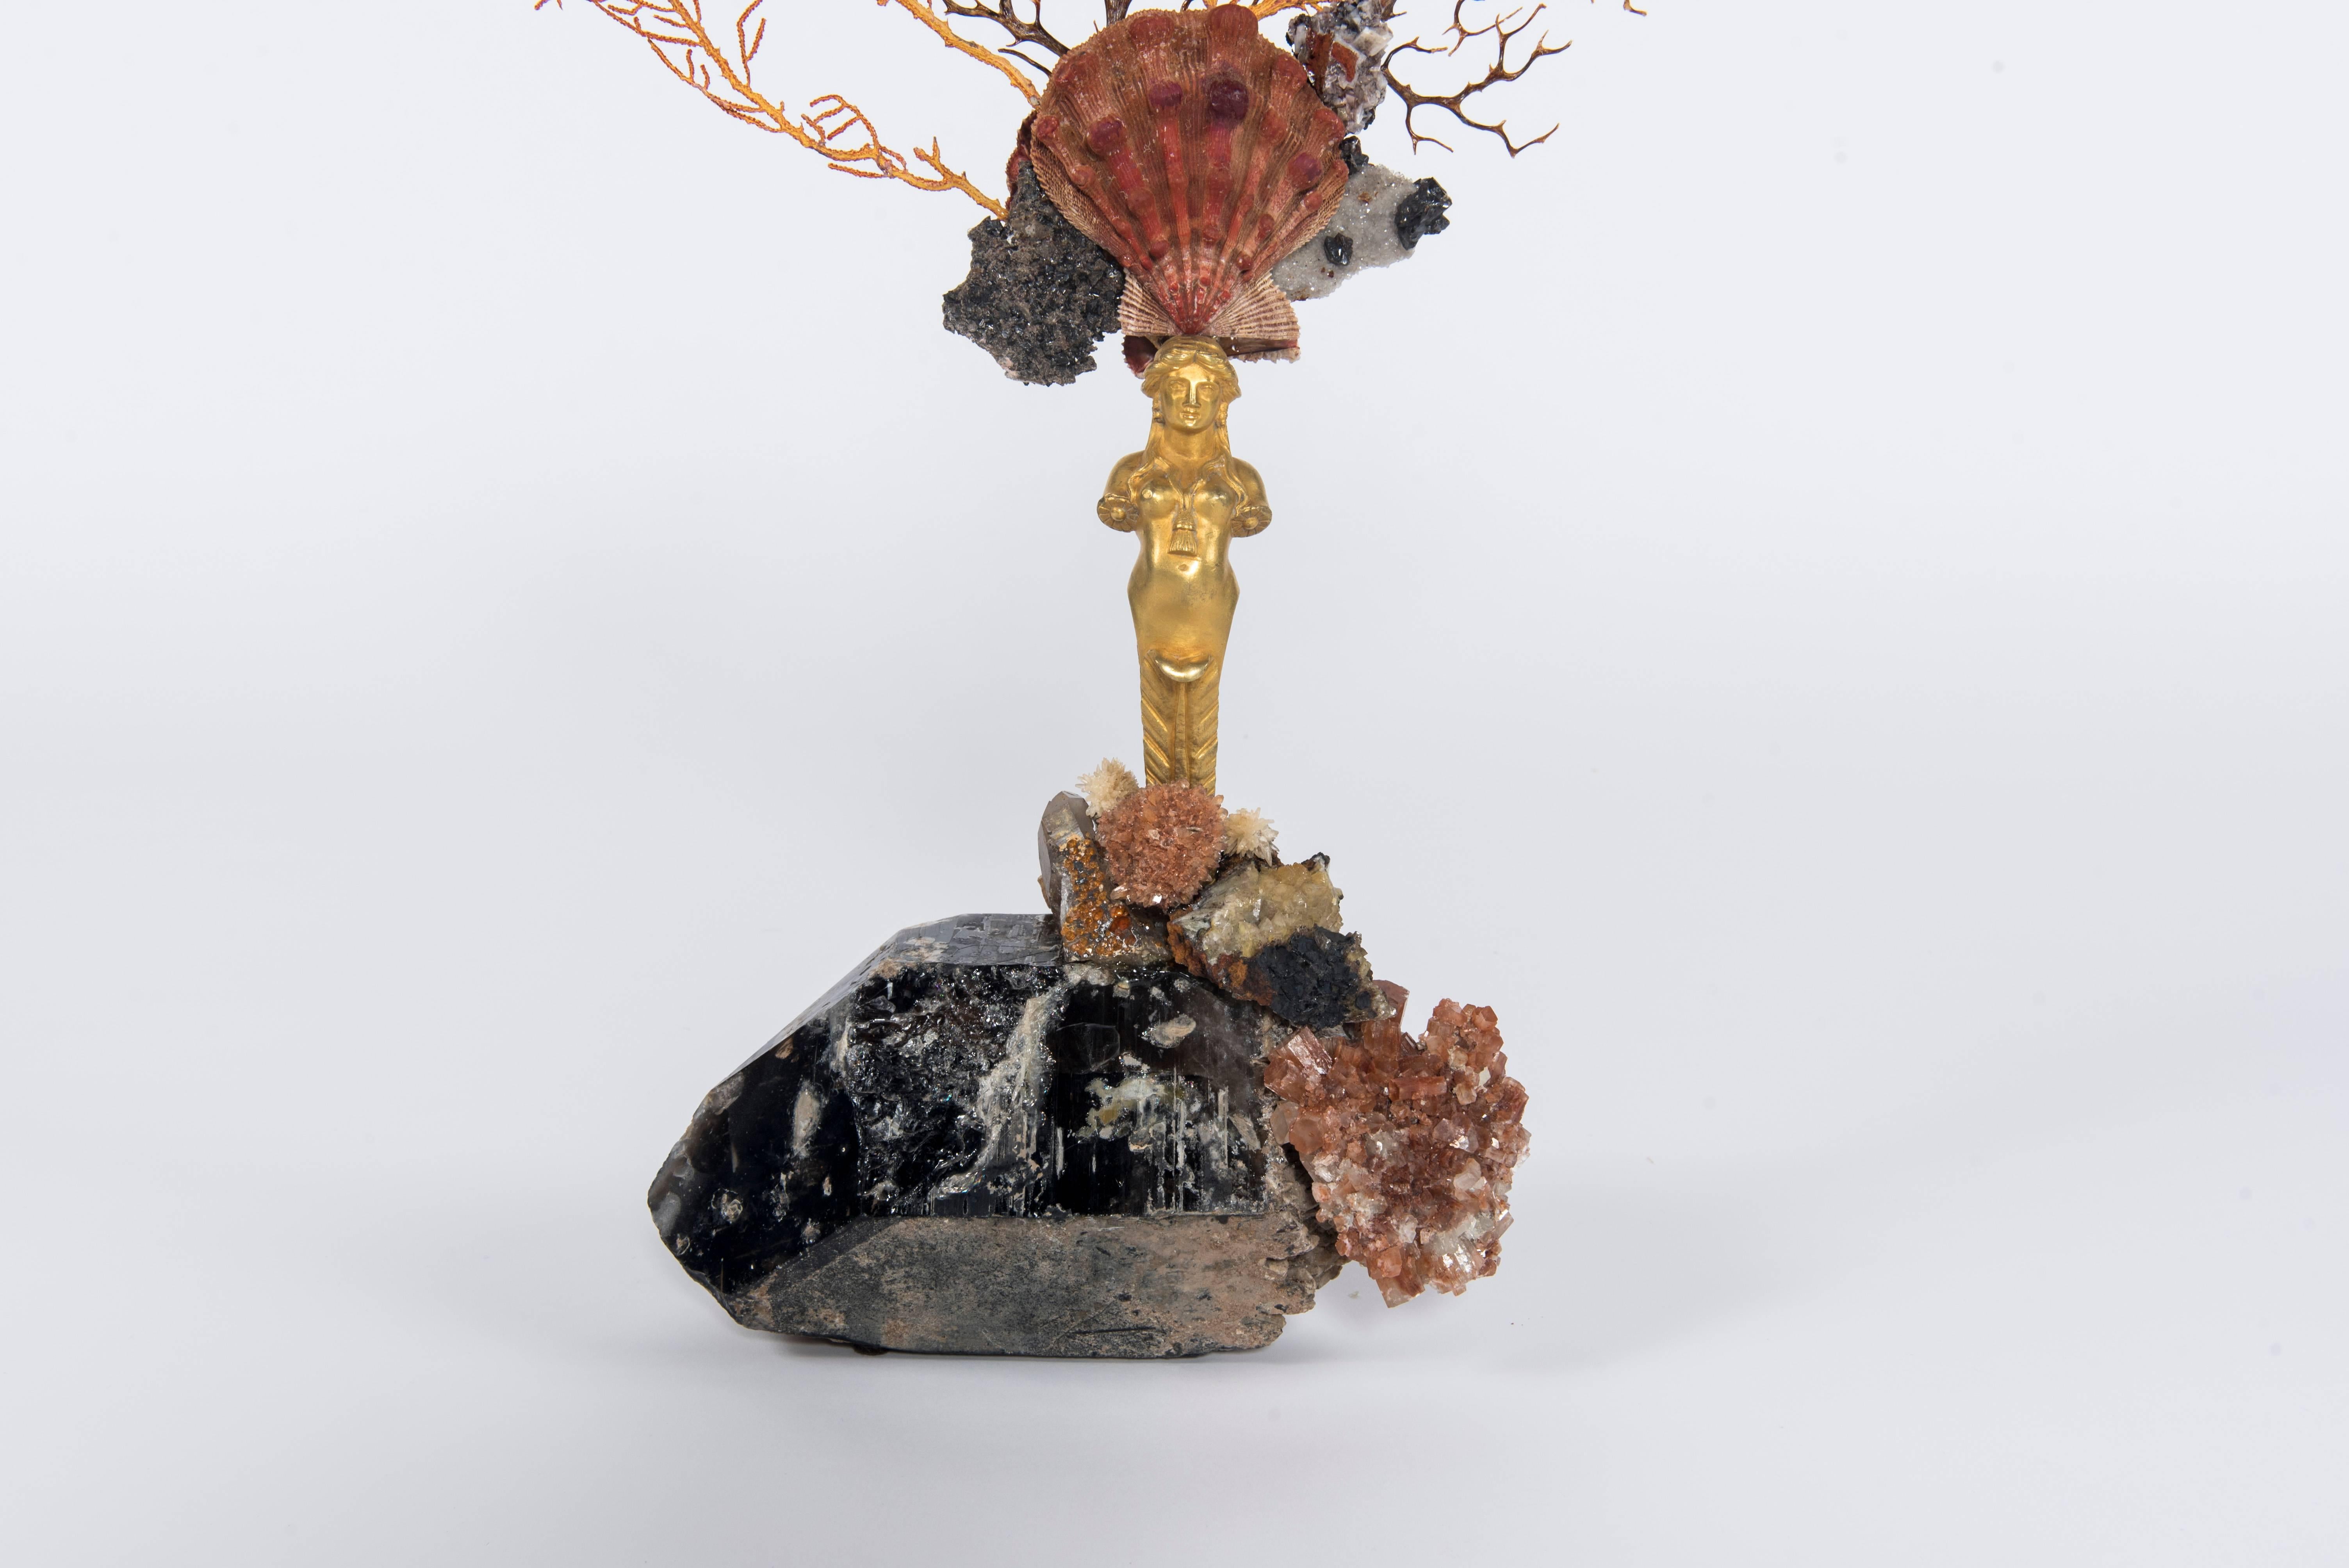 Calypso I sculpture. An early 19th century bronze doré caryatid sits atop a large natural smoky quartz base. Her head is beautifully affixed with a crown adorned by a rare complete lion's paw shell, mixed sea fan corals and minerals. The bounty of